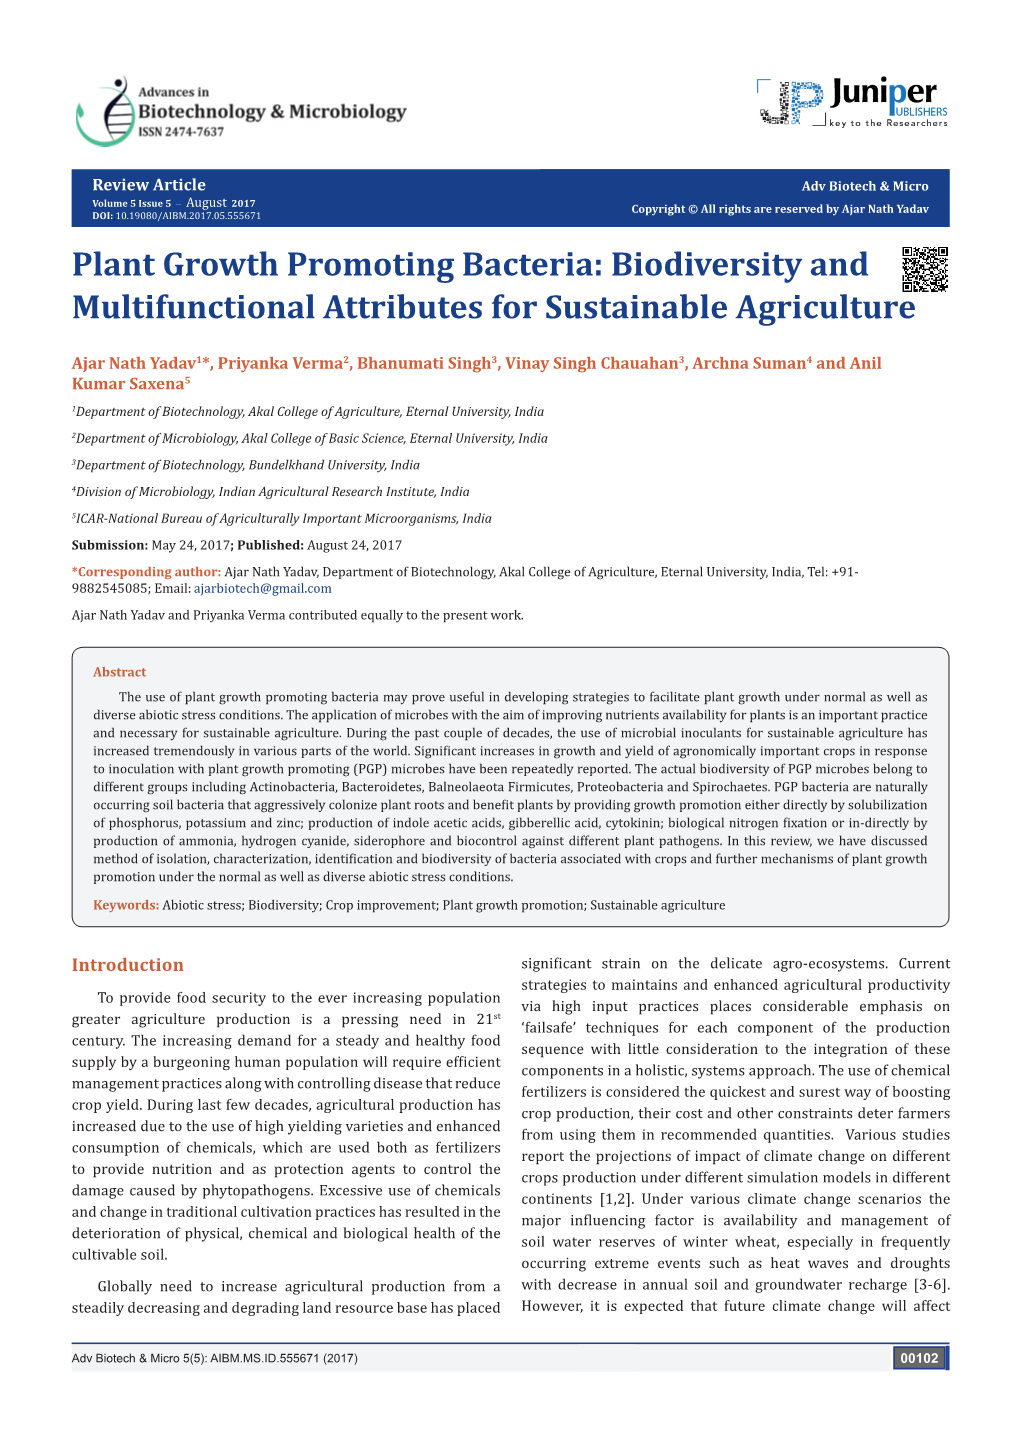 Plant Growth Promoting Bacteria: Biodiversity and Multifunctional Attributes for Sustainable Agriculture